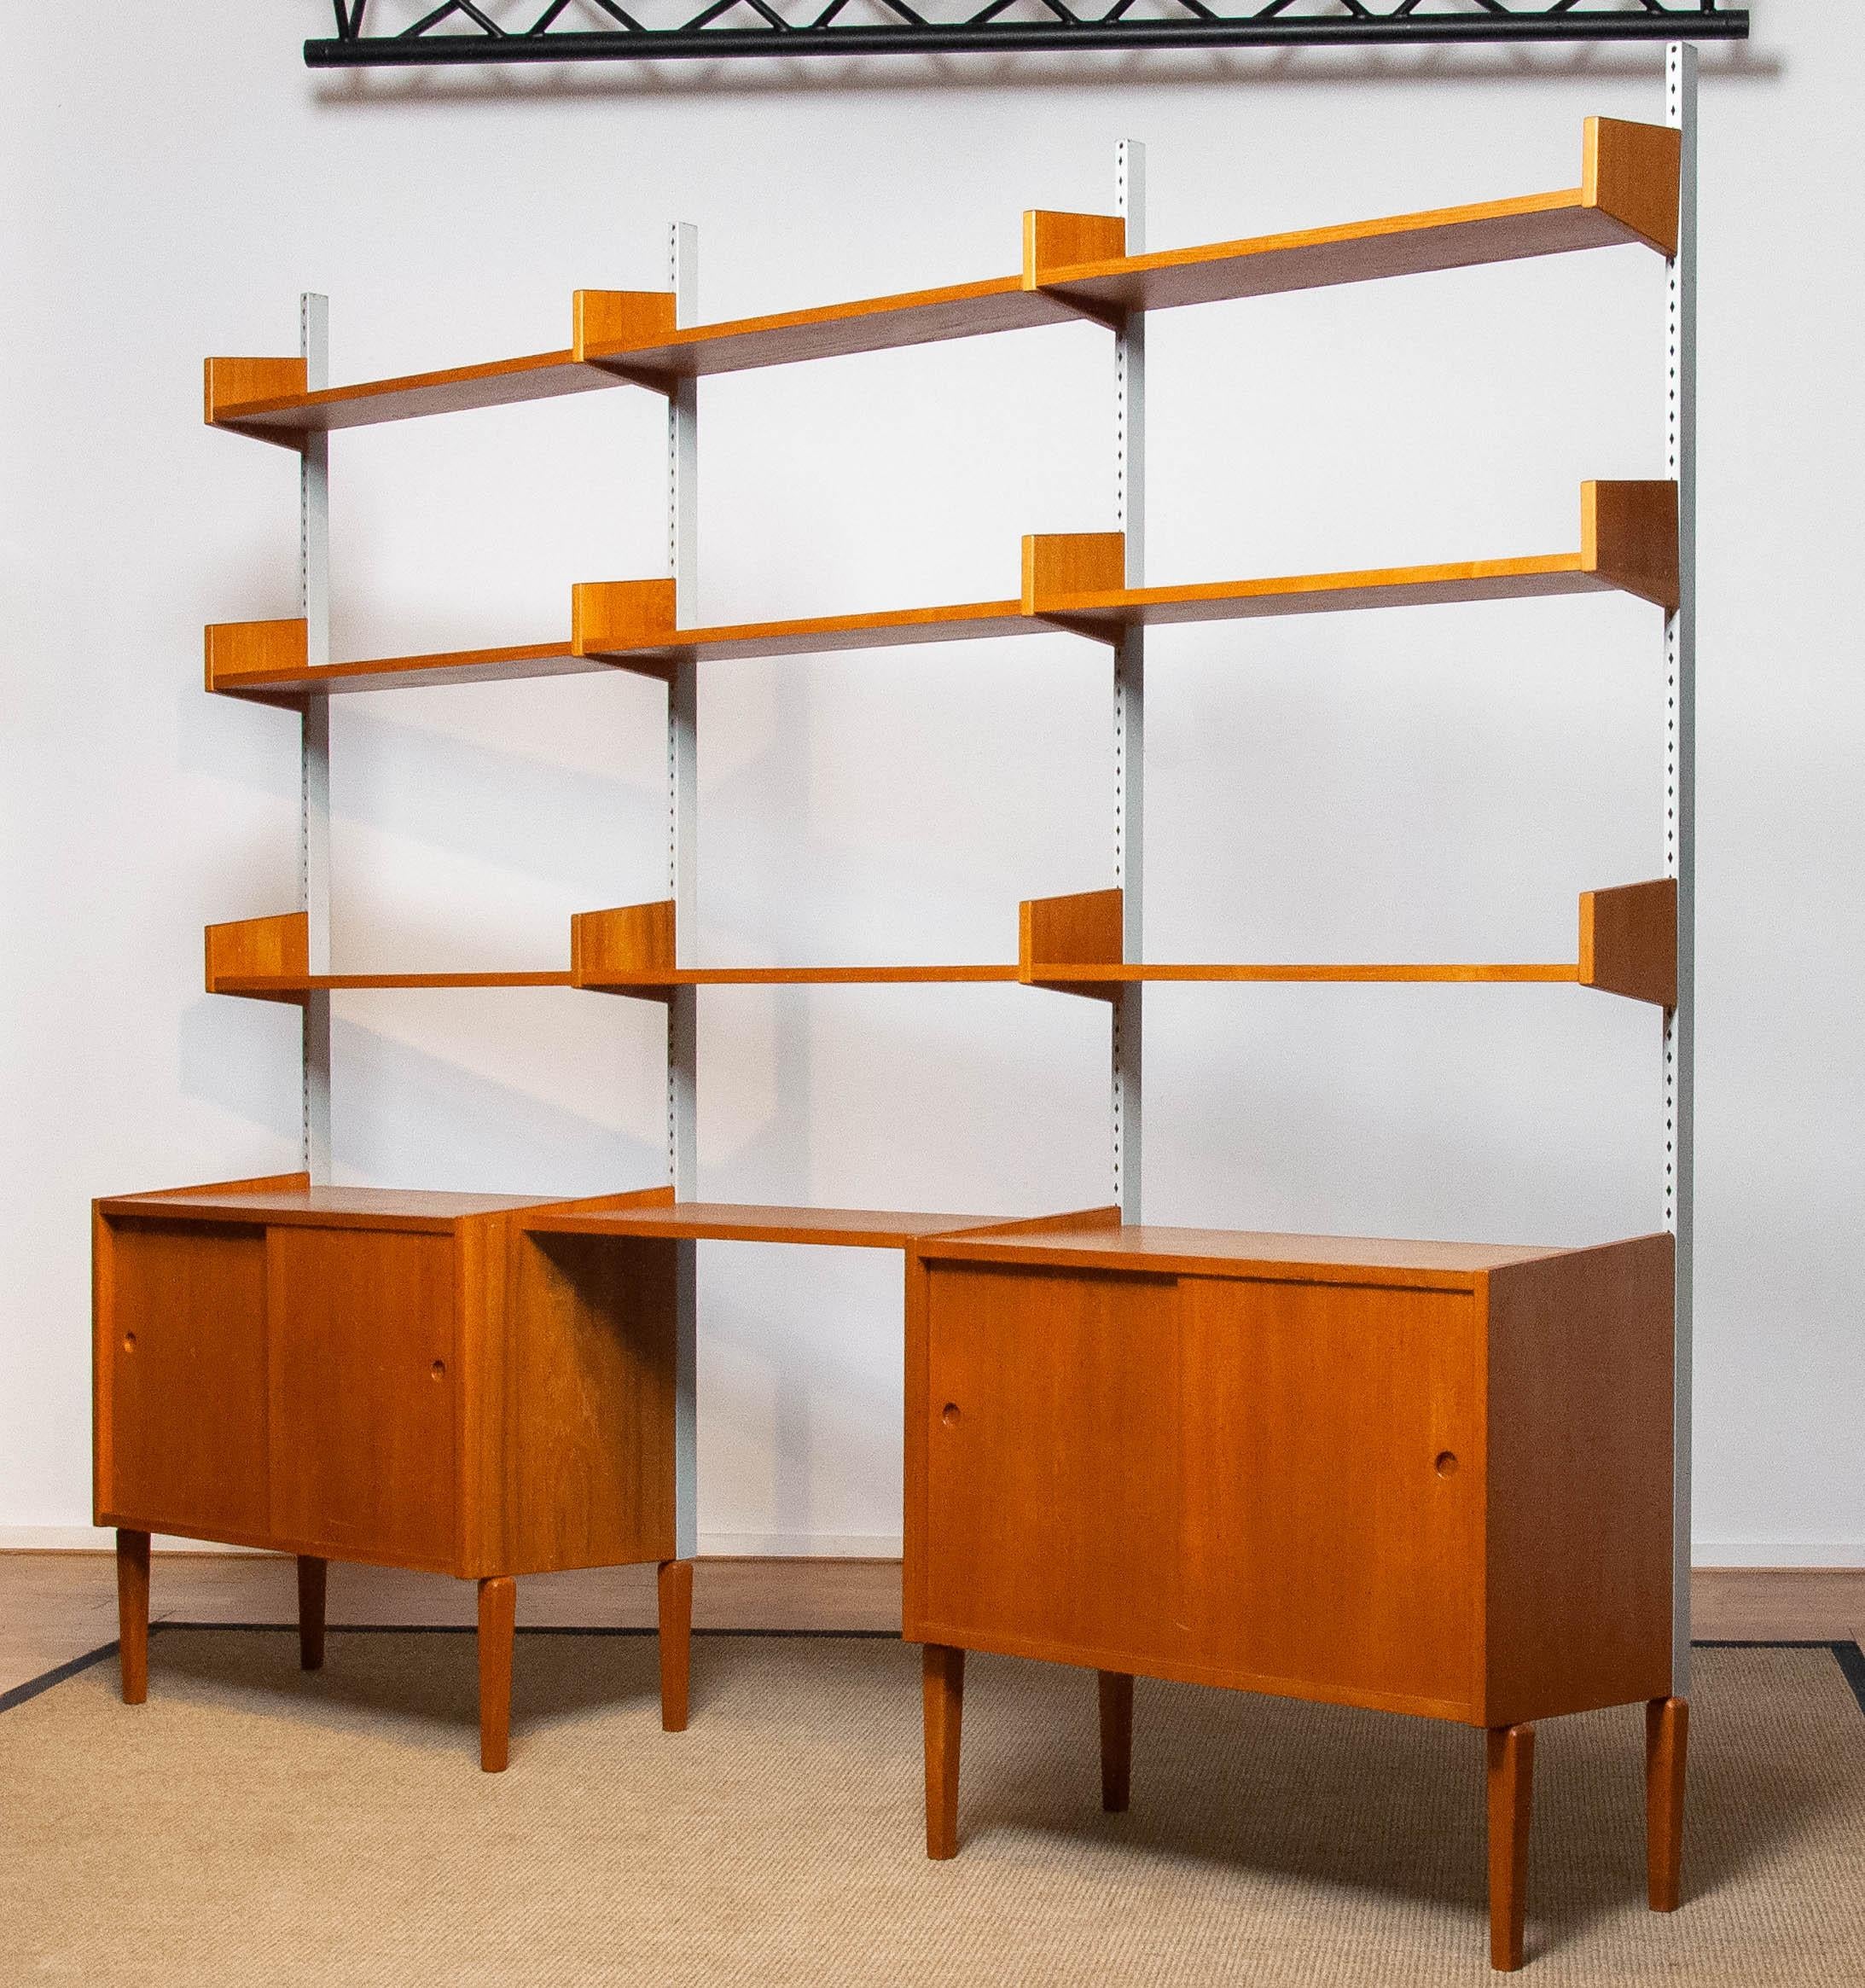 Mid-Century Modern Teak Modulair Shelf System / Bookcase with Steel Bars by Harald Lundqvist 1950